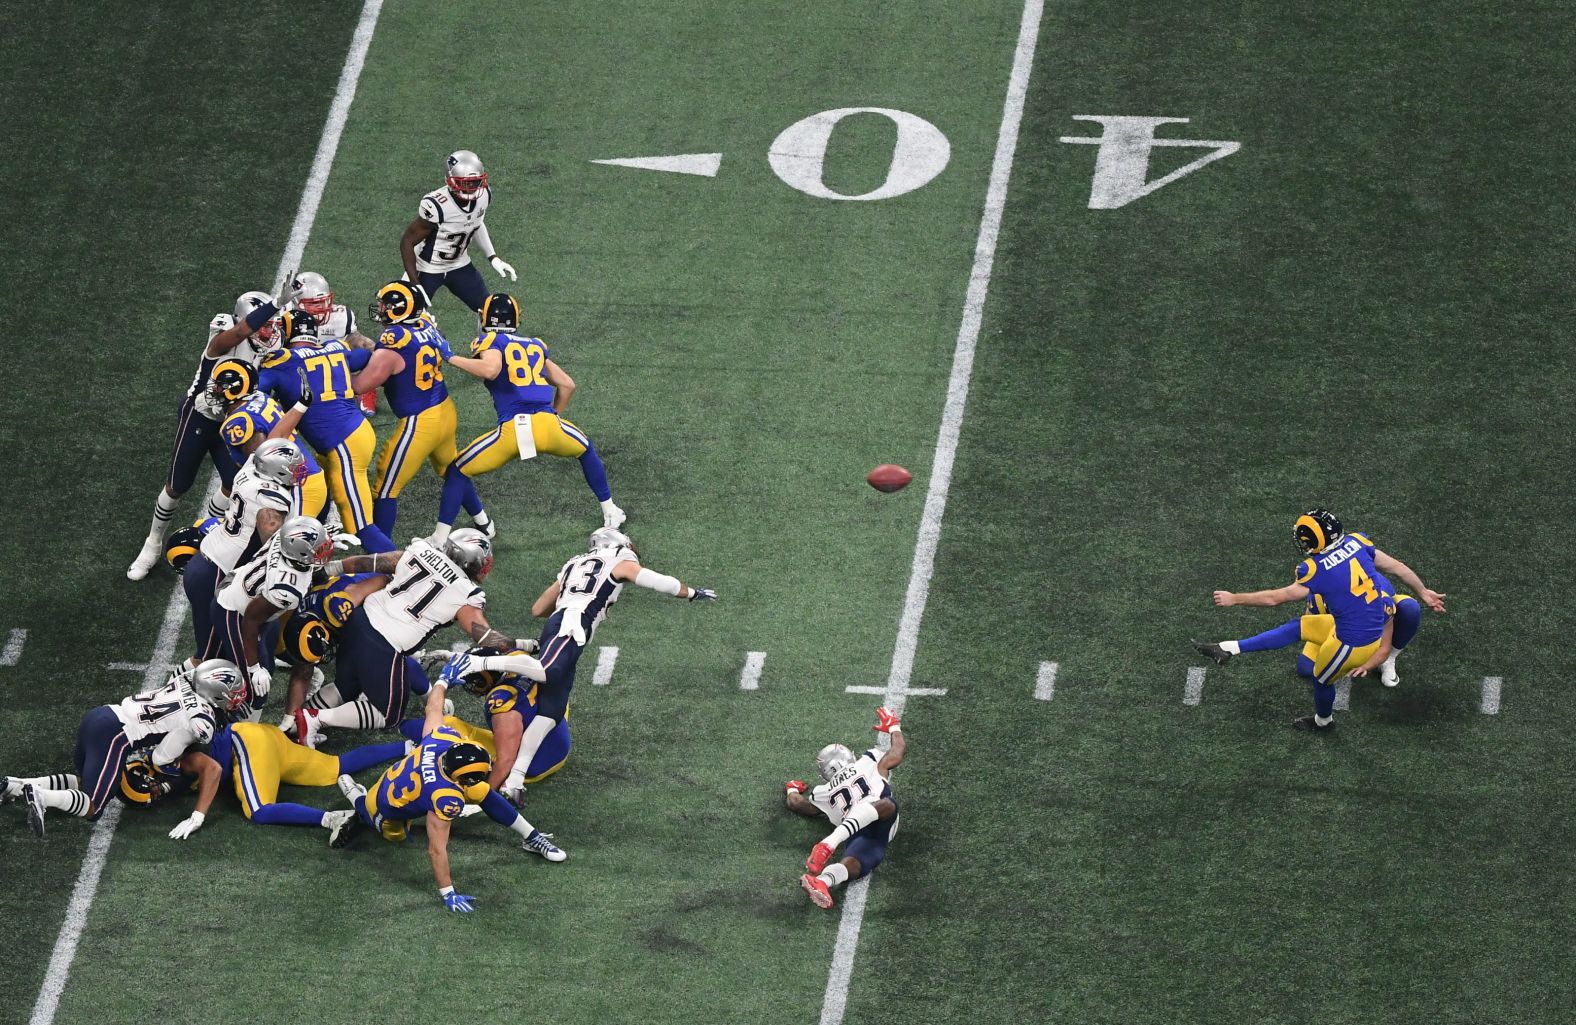 Rams kicker Greg Zuerlein connects on a 53-yard field goal to tie the game at 3-3 in the third quarter.